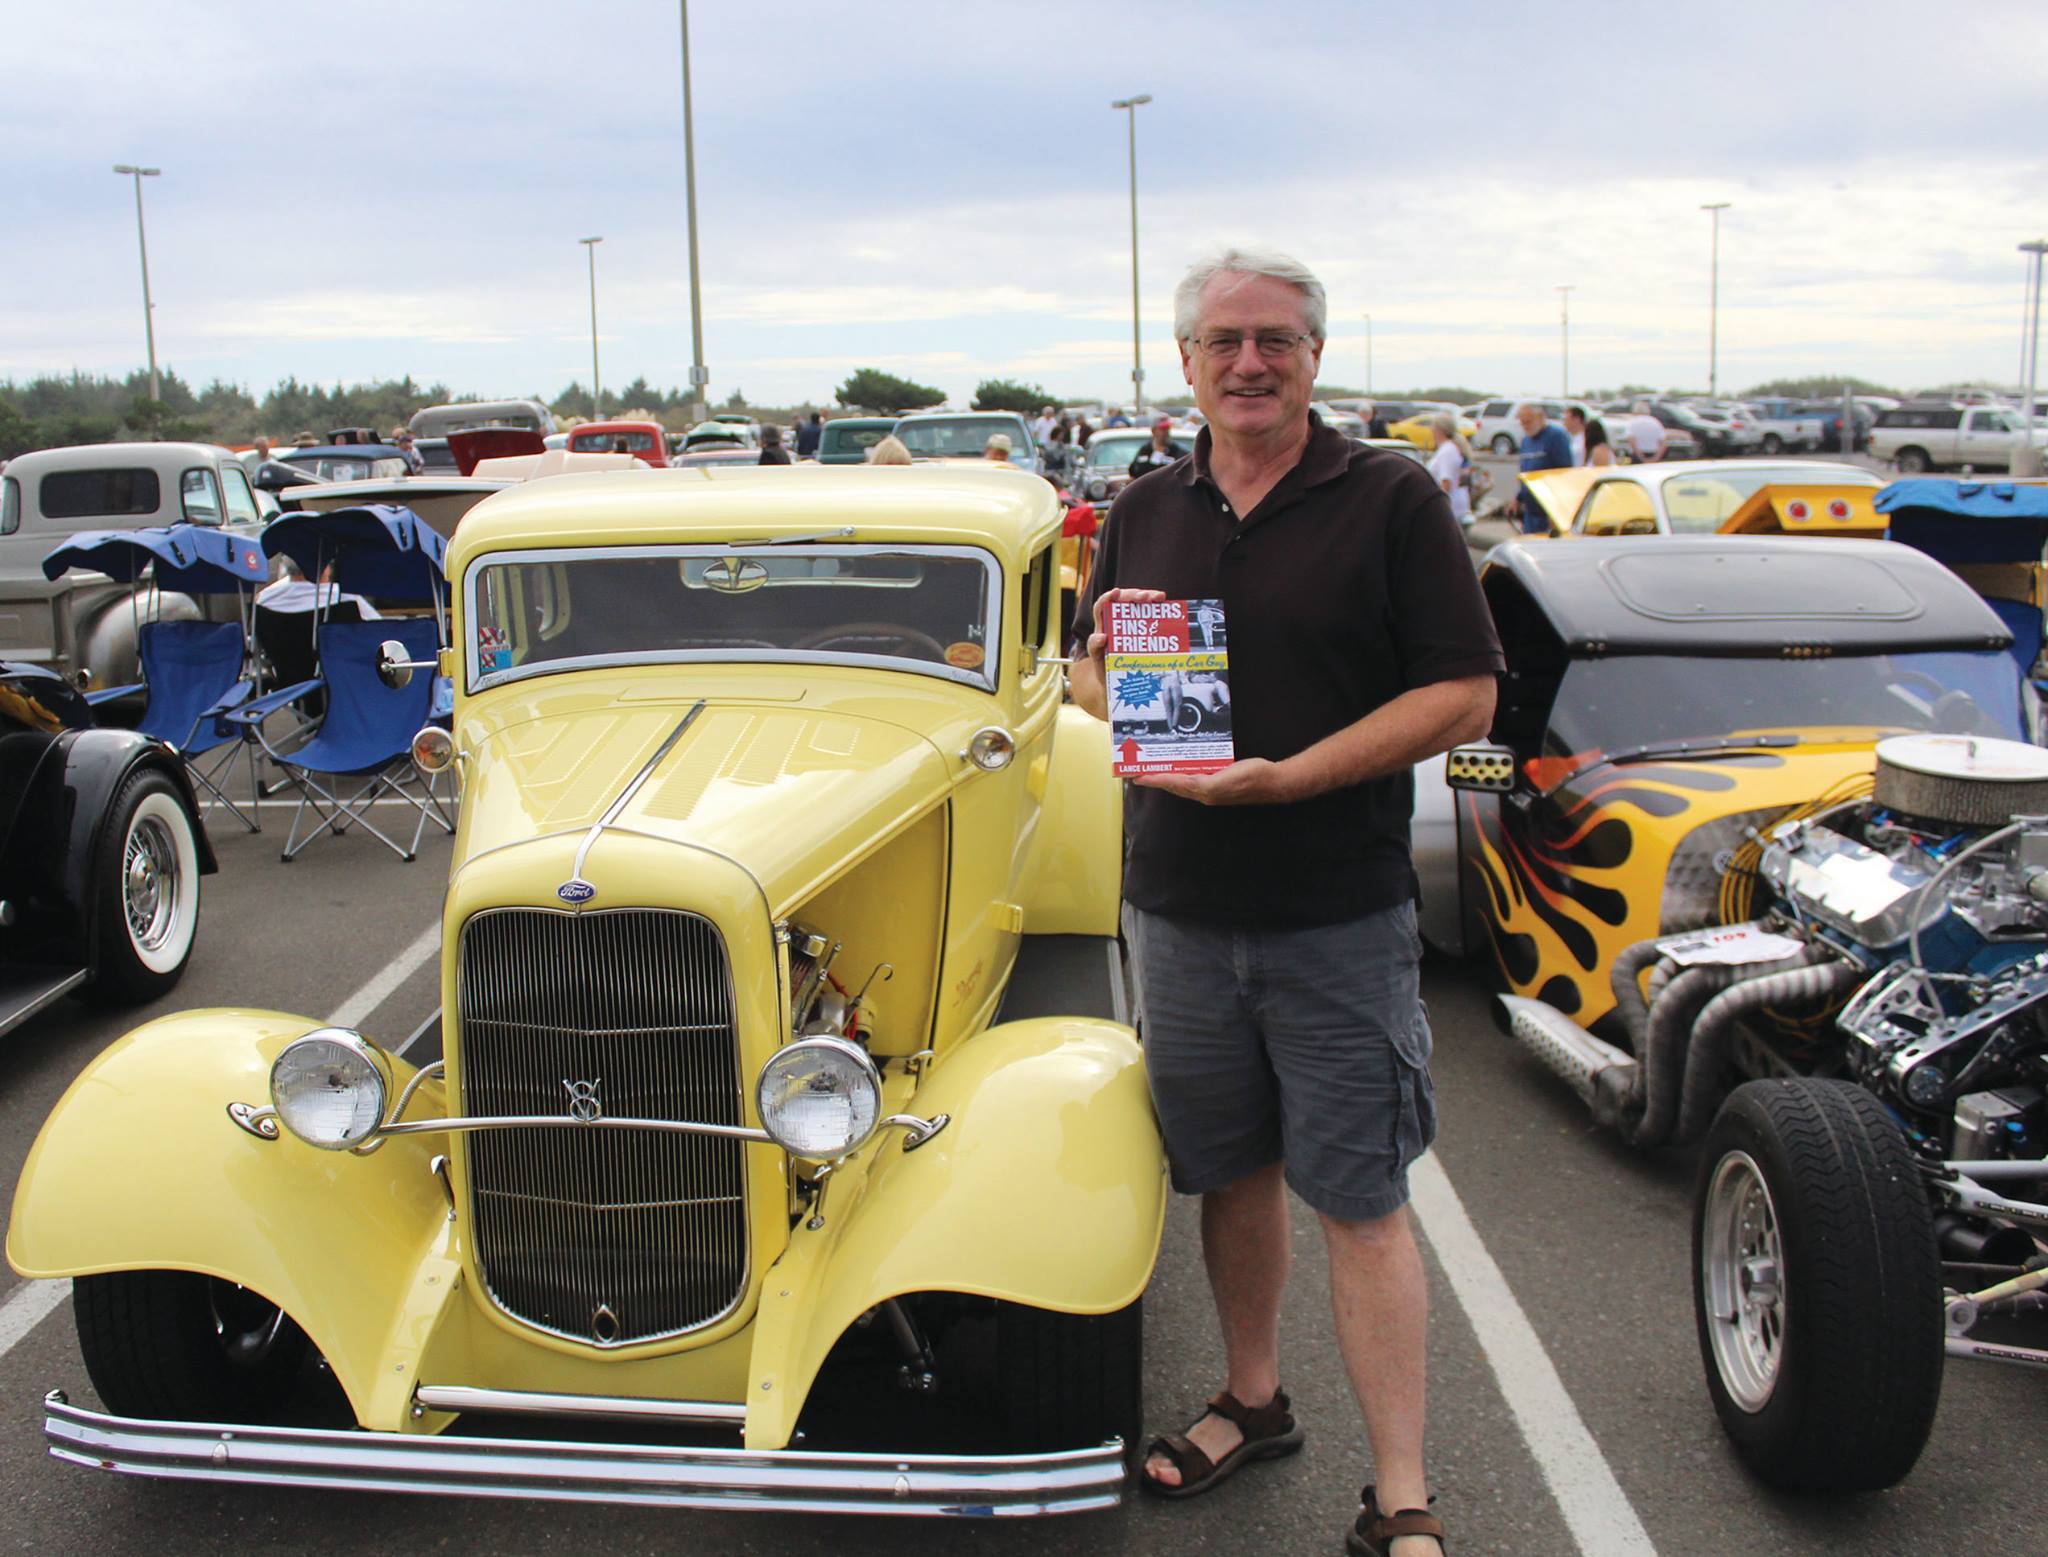 North Coast News: Lance Lambert displays one of his books at the Quinault Beach Resort and Casino during Show n’ Shine at the Shores.